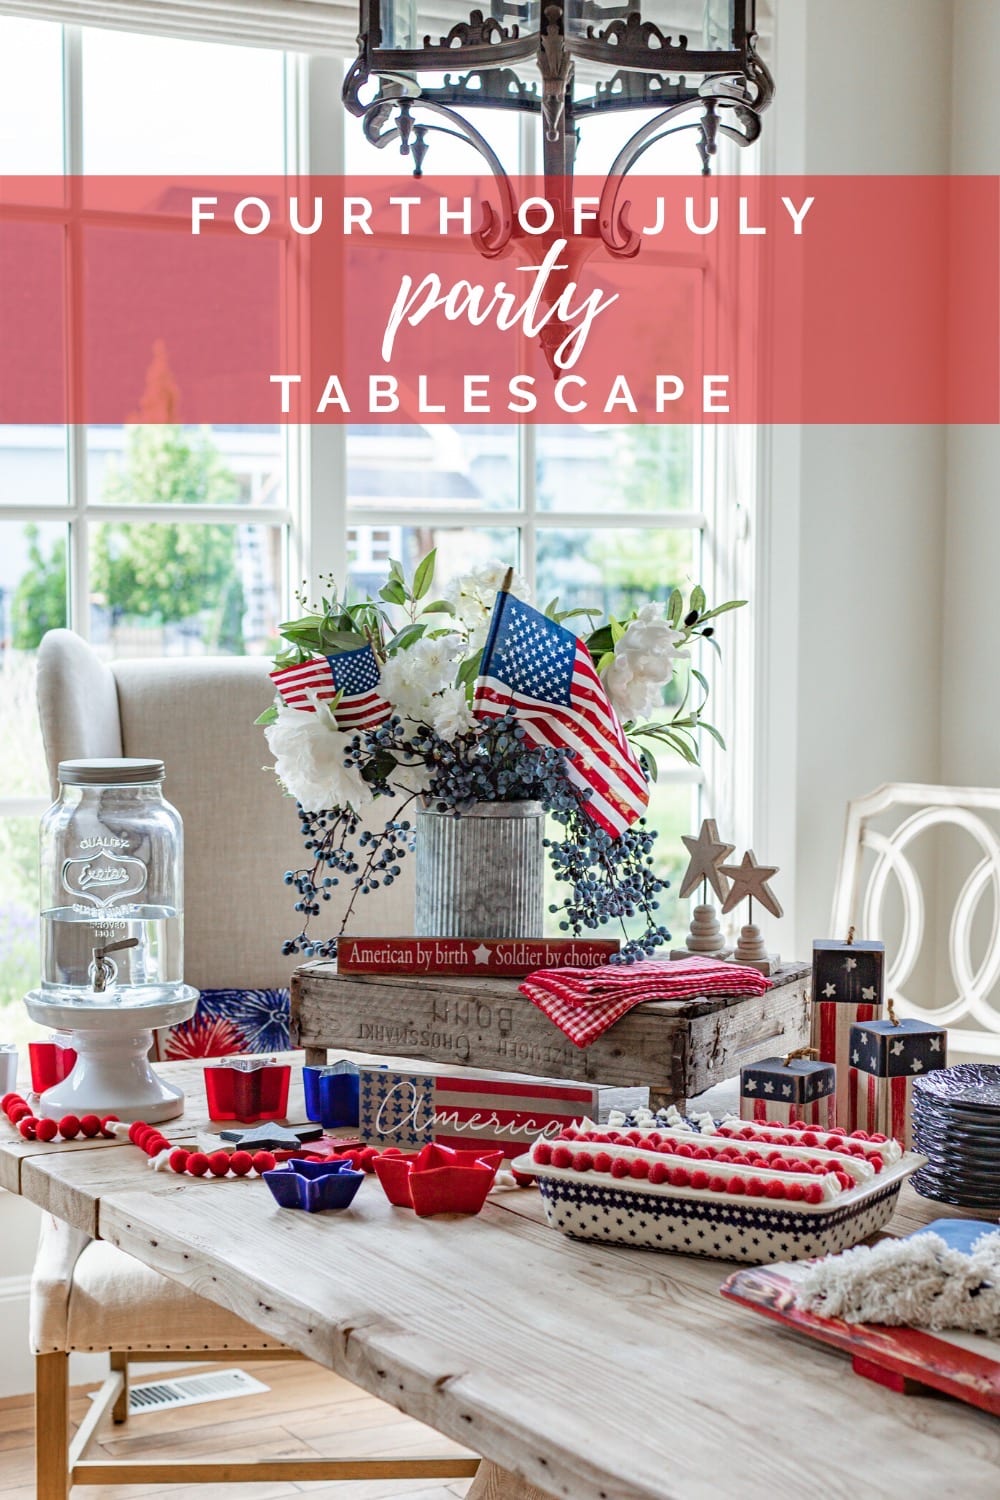 Fourth of July party tablescape ideas